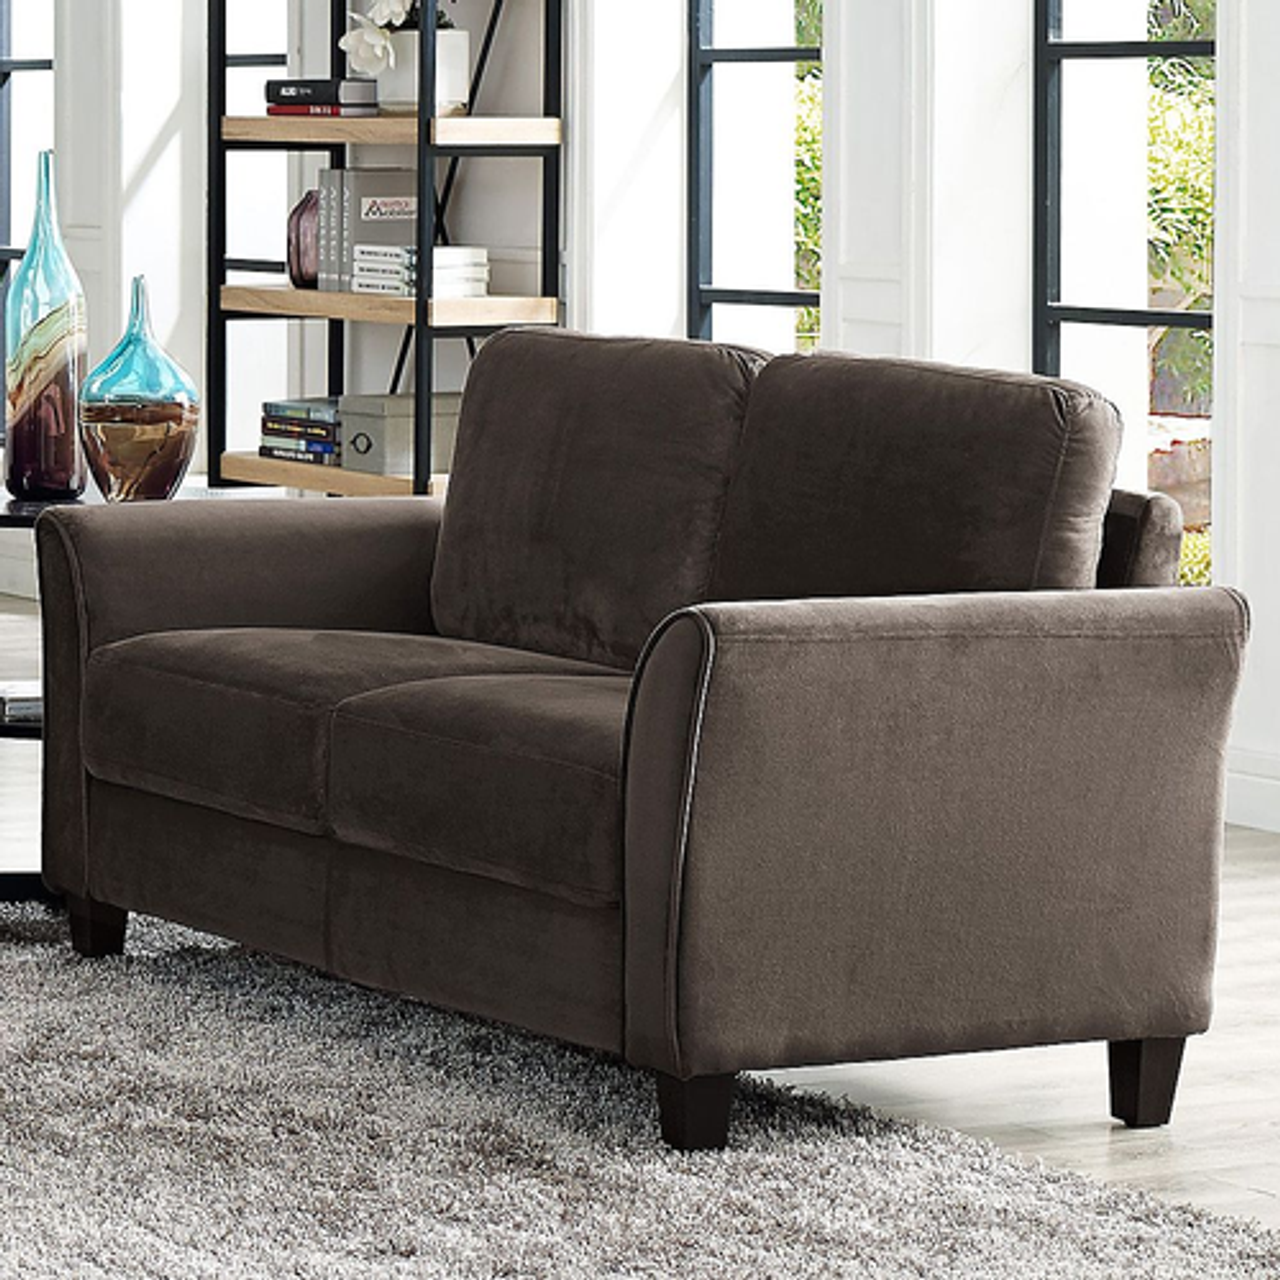 Lifestyle Solutions - Westin 2-Seat Curved Arm Microfiber Loveseat - Coffee